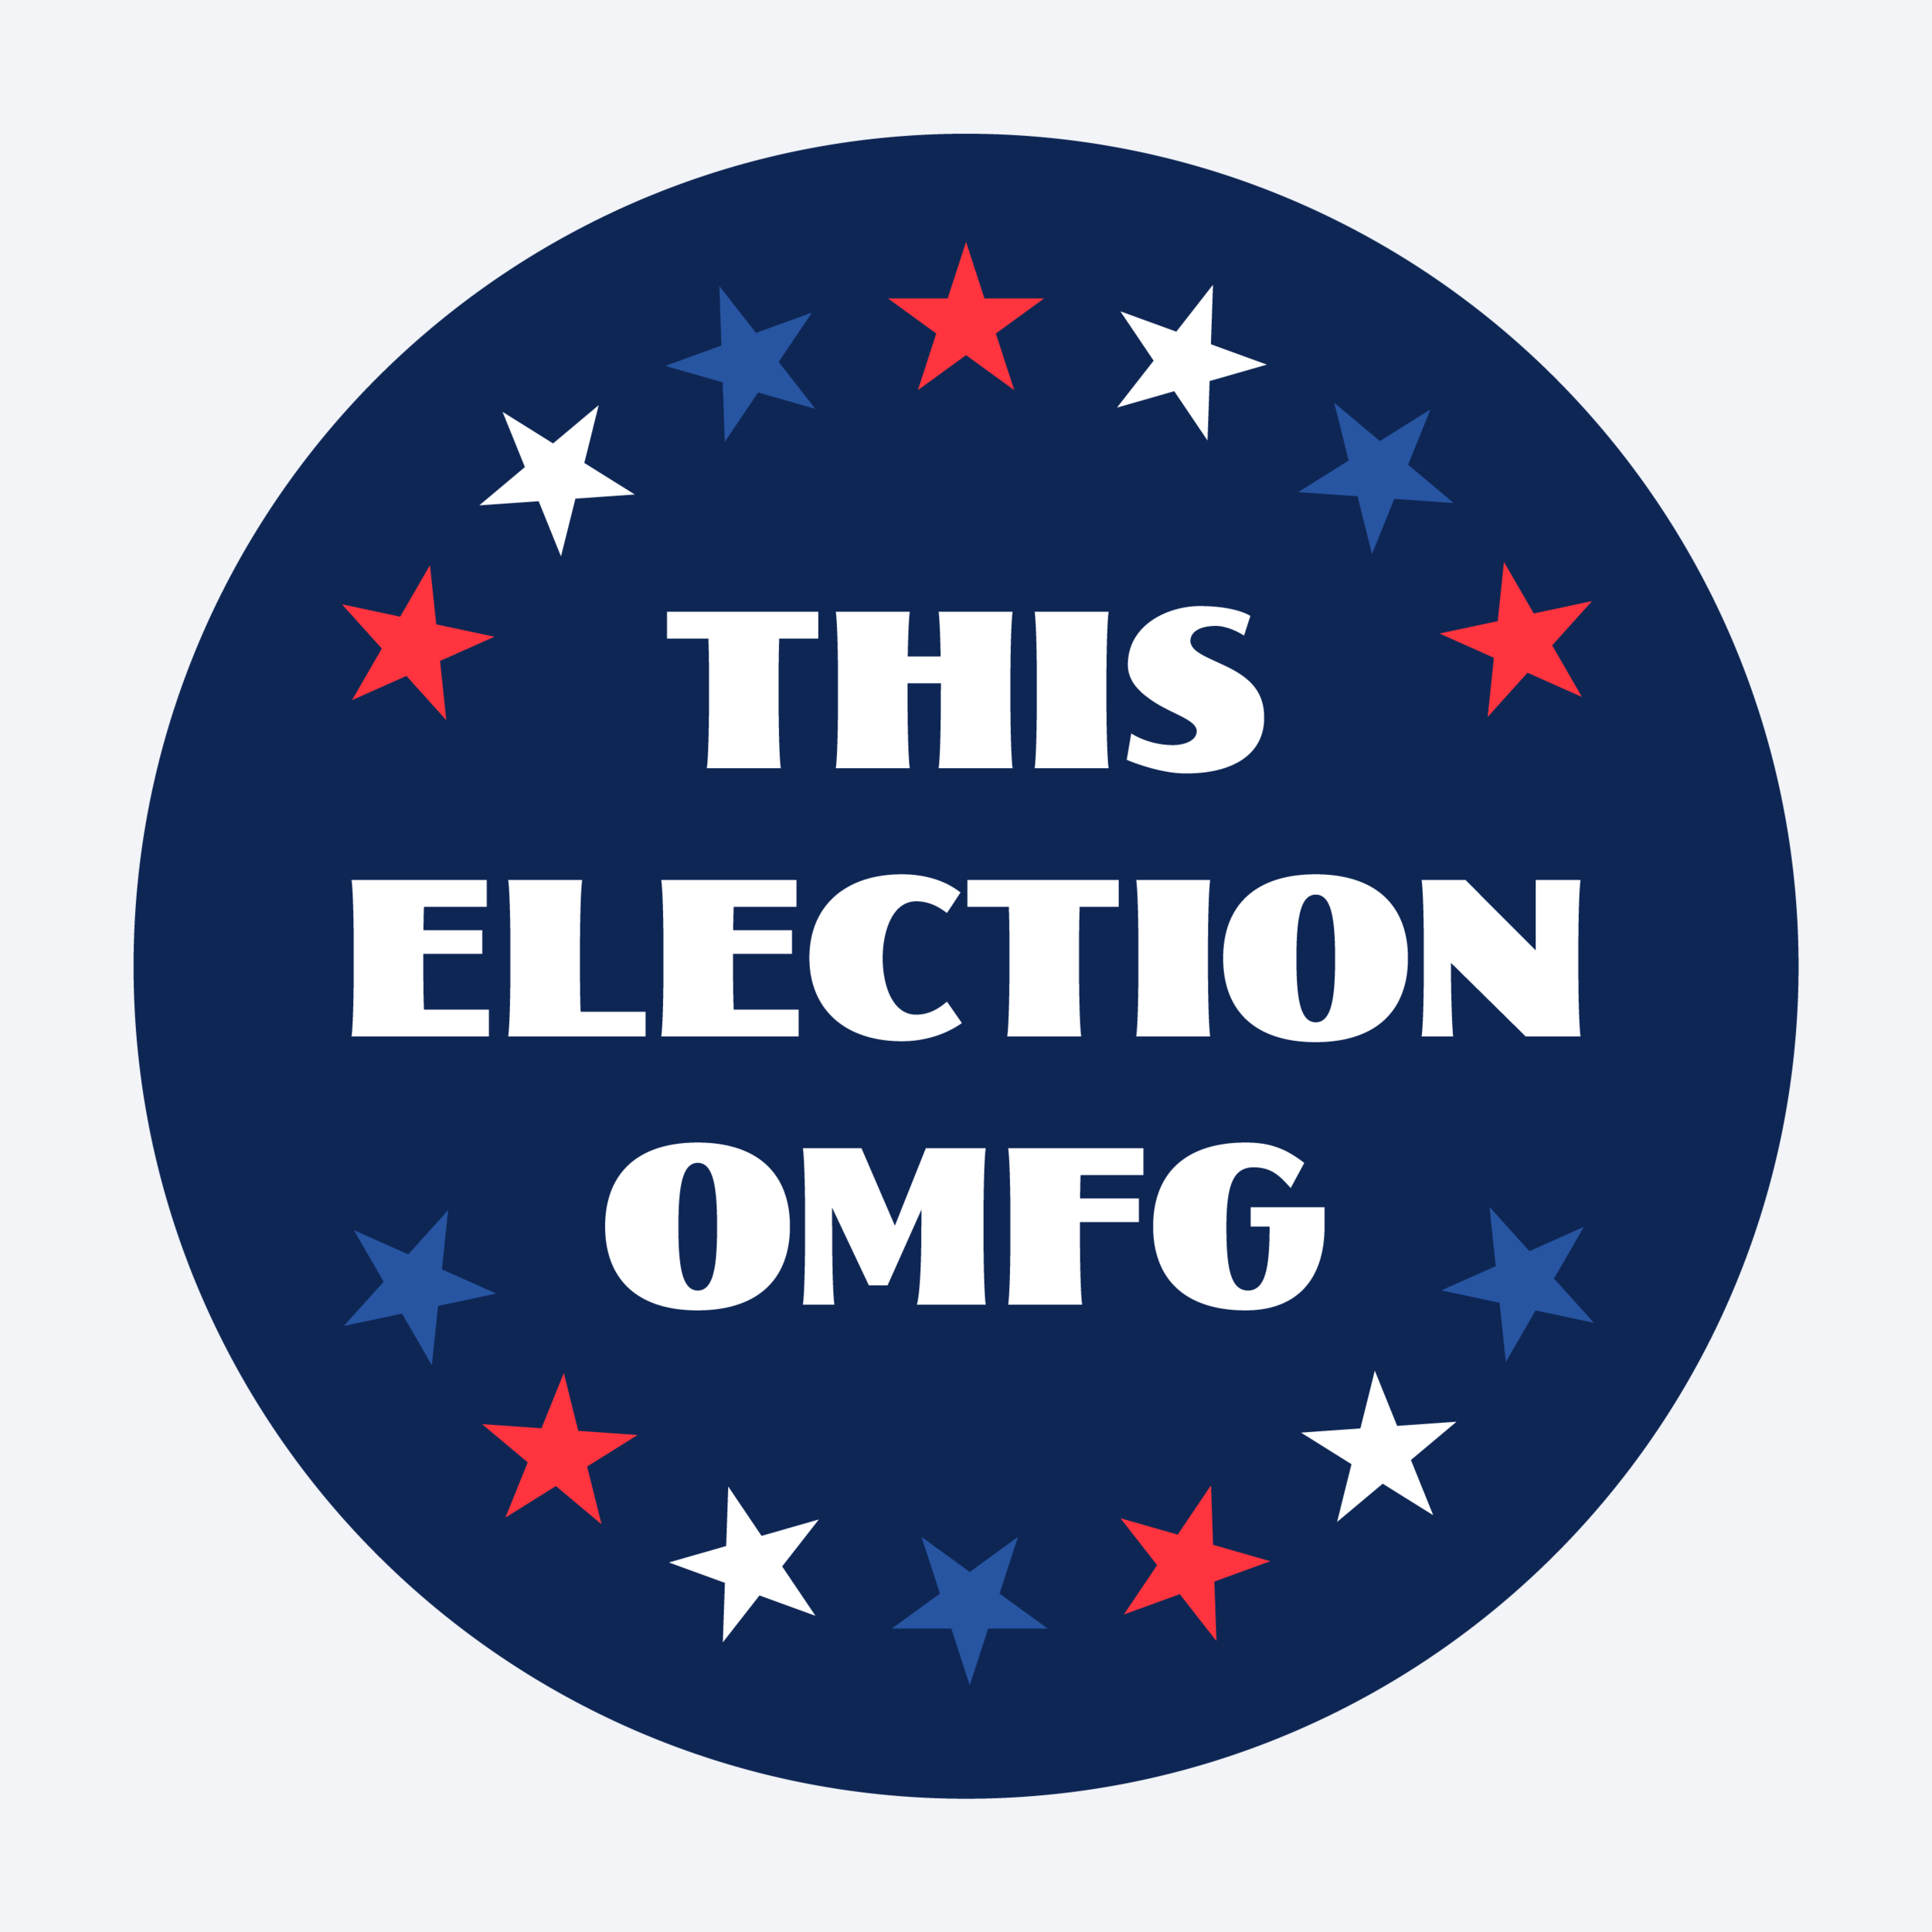 WeVoted-Stickers_Artboard 1 copy 12.png